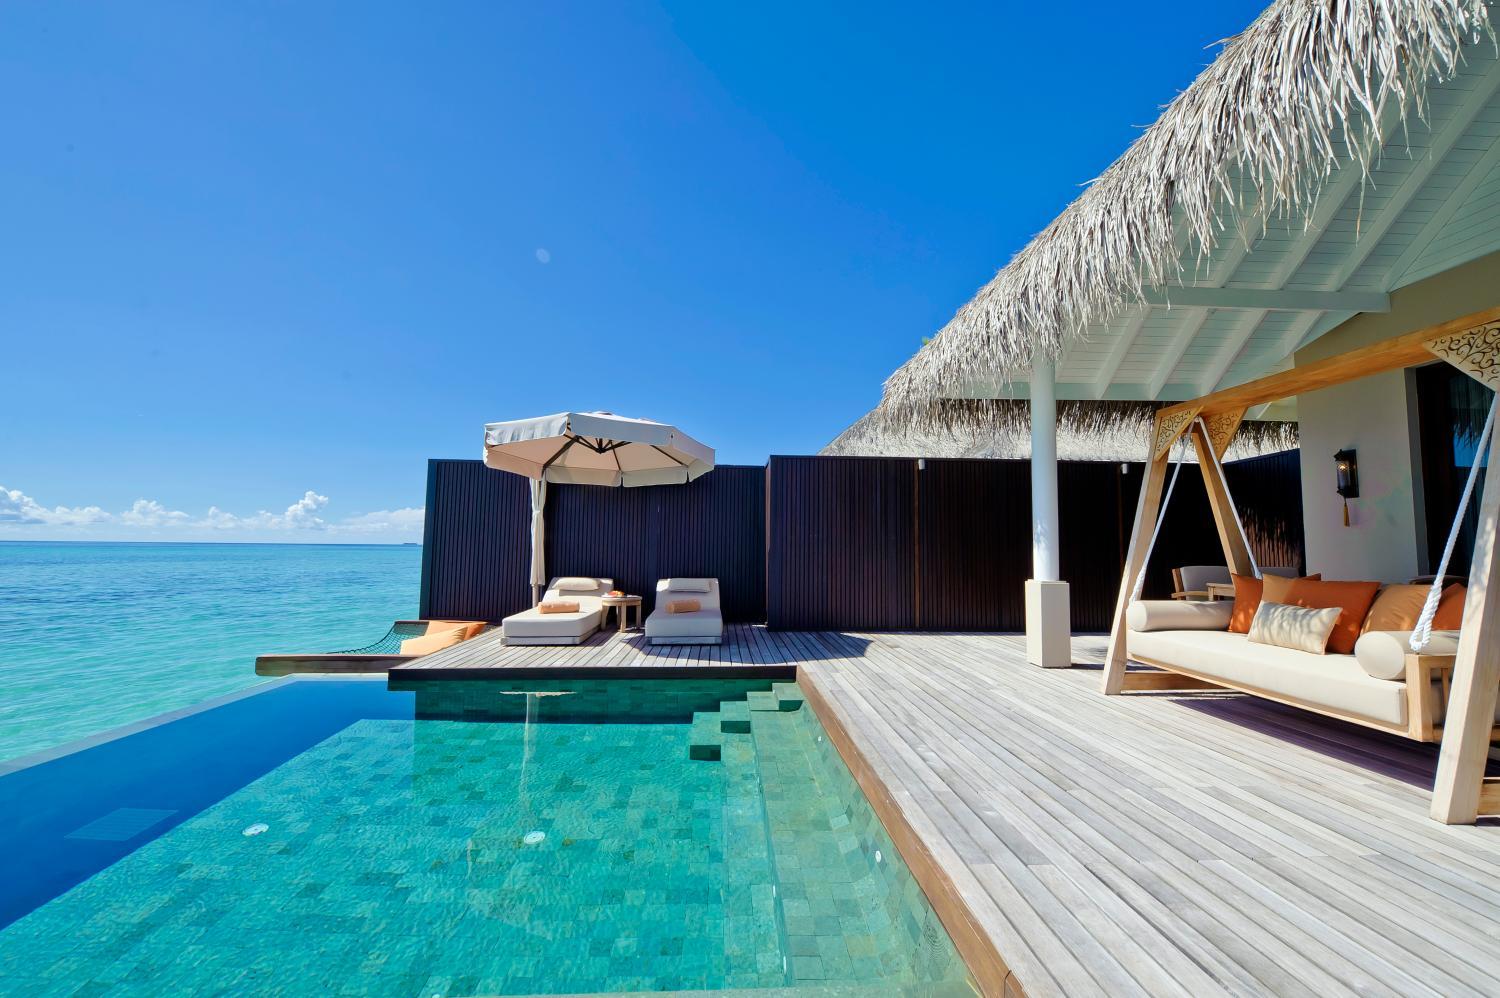 Hotel with private pool - Ayada Maldives